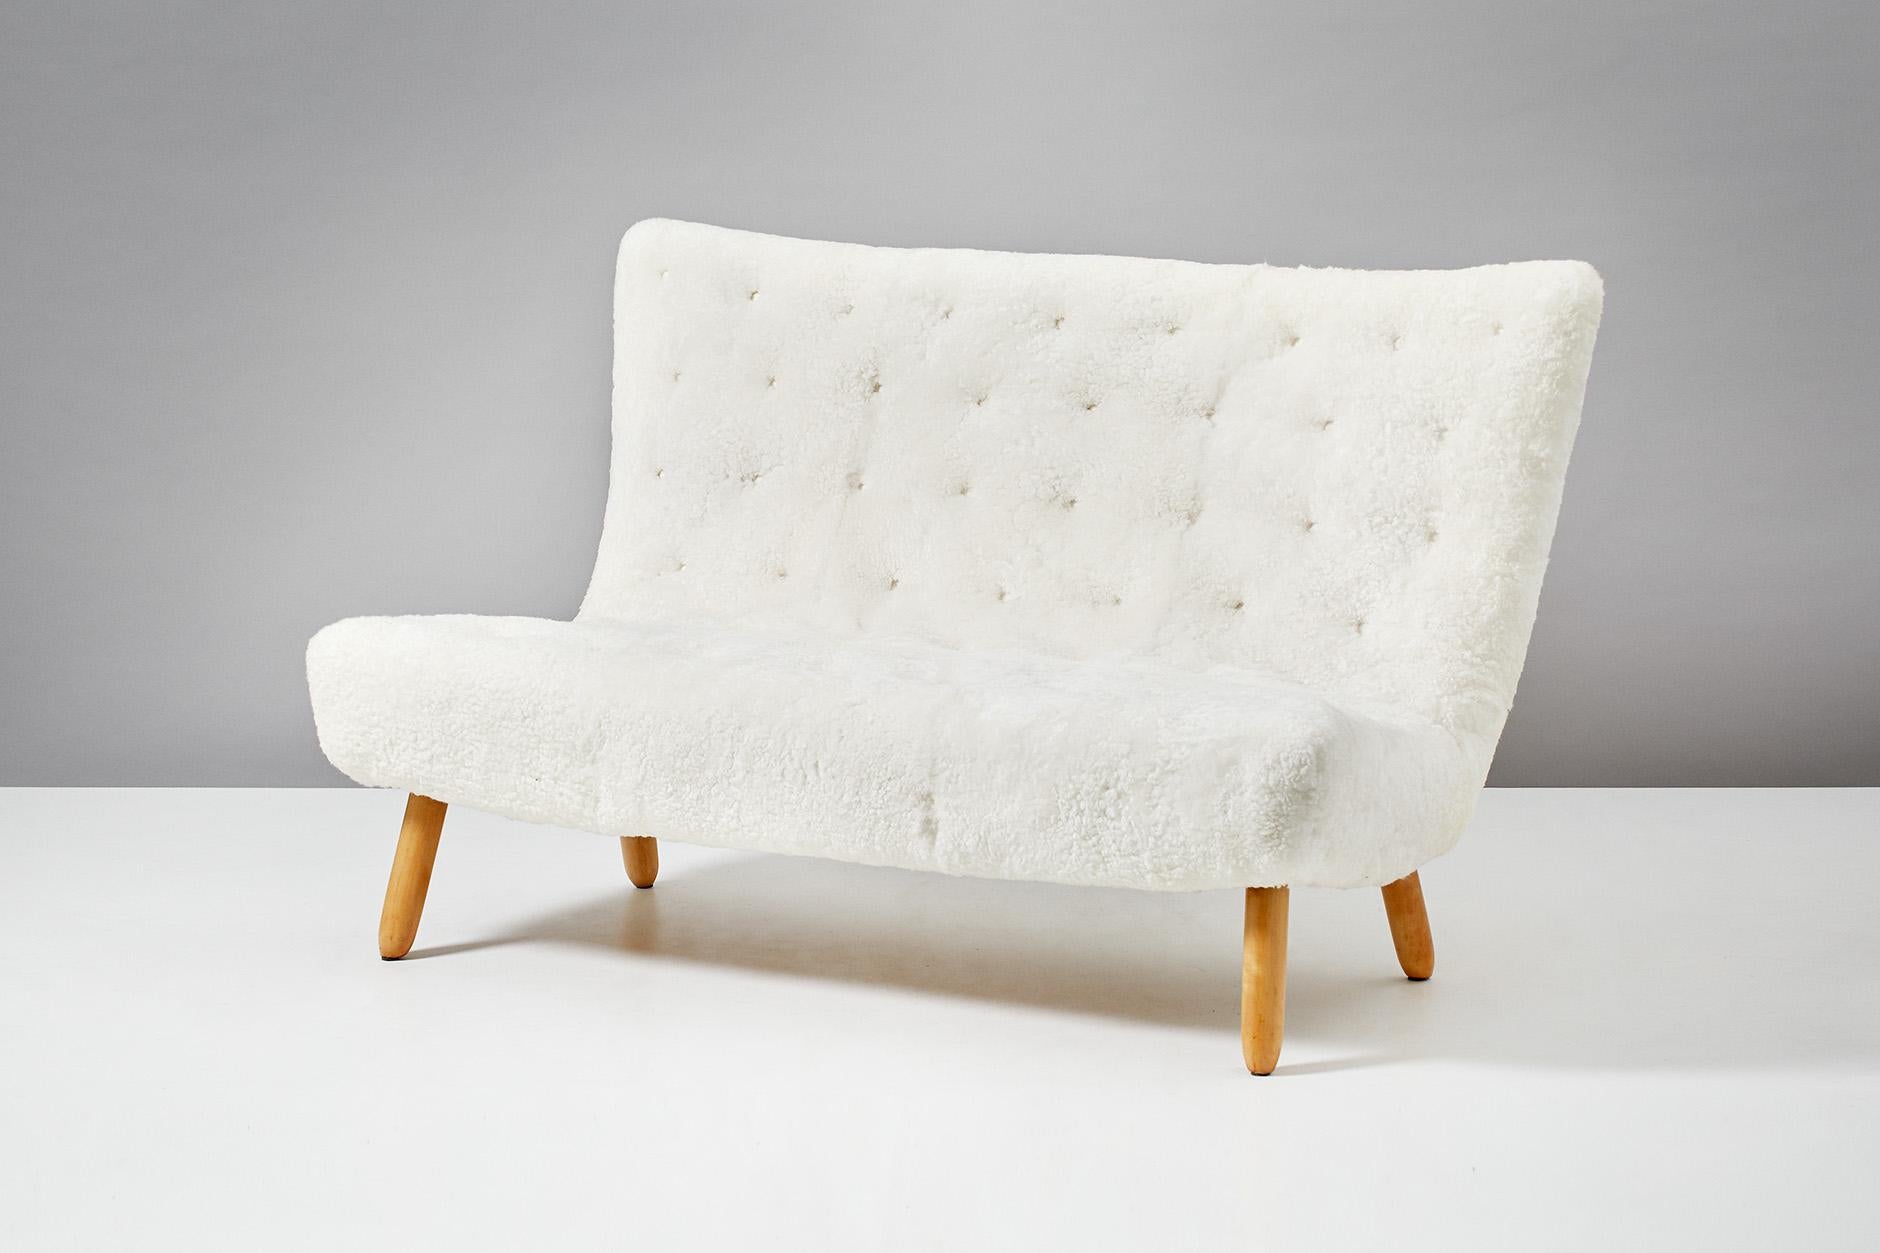 Philip Arctander (attributed)

Clam sofa, 1950s.

Small sofa bench attributed to Danish architect Philip Arctander which compliments his iconic “Muslingestolen” (the Clam chair). The sofa appears in a Swedish home furnishings magazine from 1952